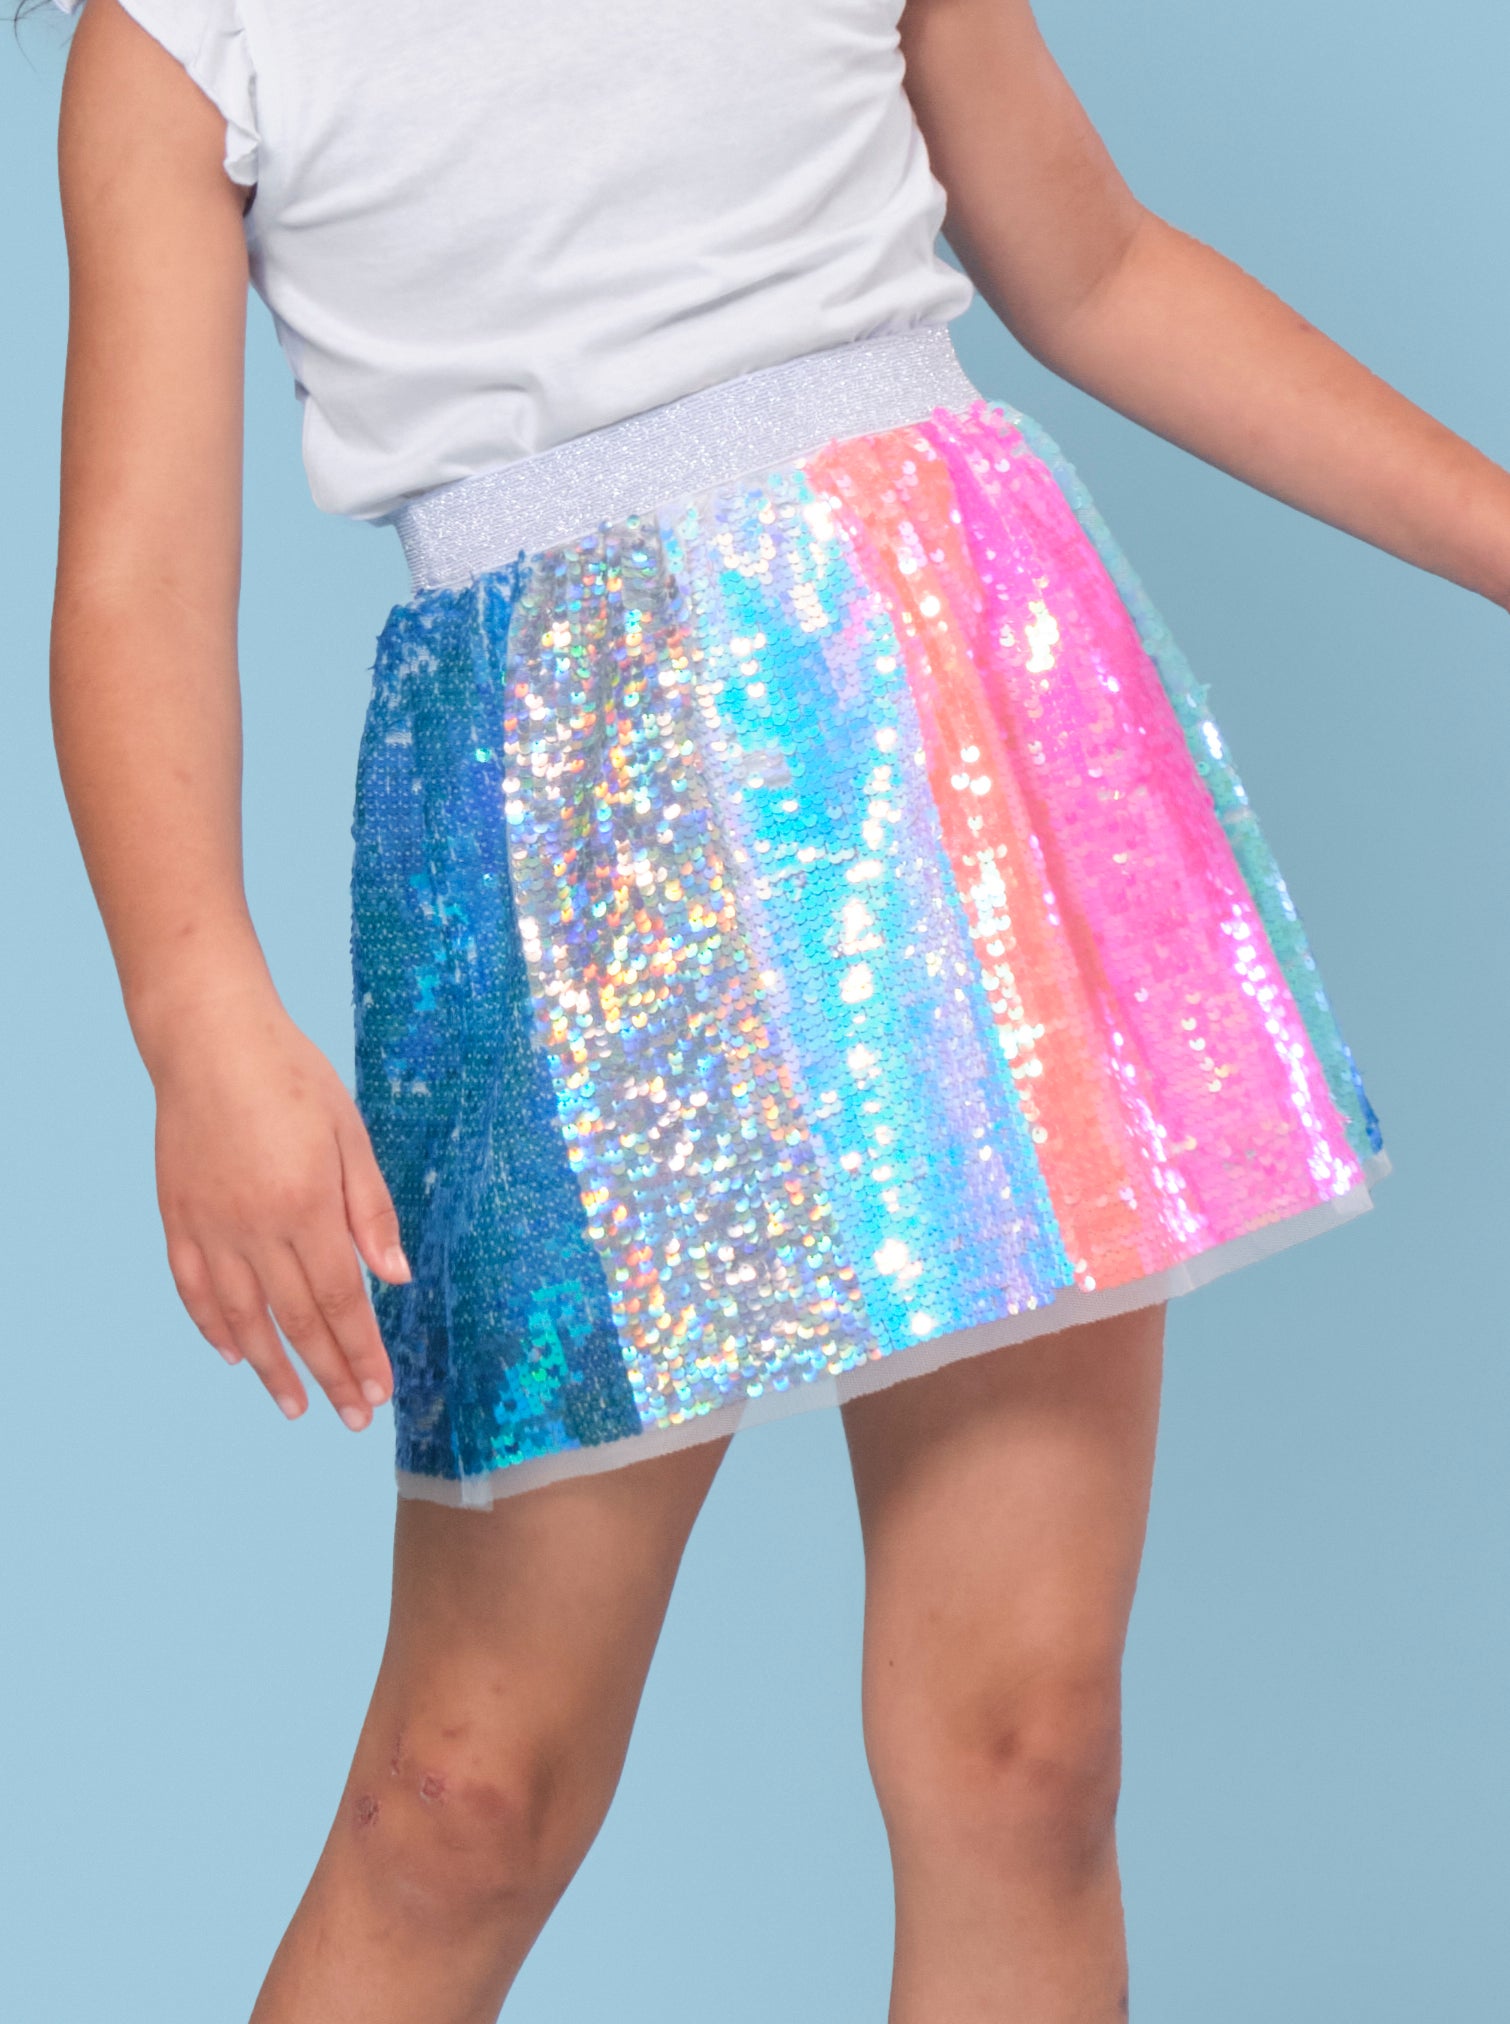 https://www.postie.co.nz/content/products/little-kids-rainbow-sequin-skirt-rainbow-multi-a-outfit-815340.jpg